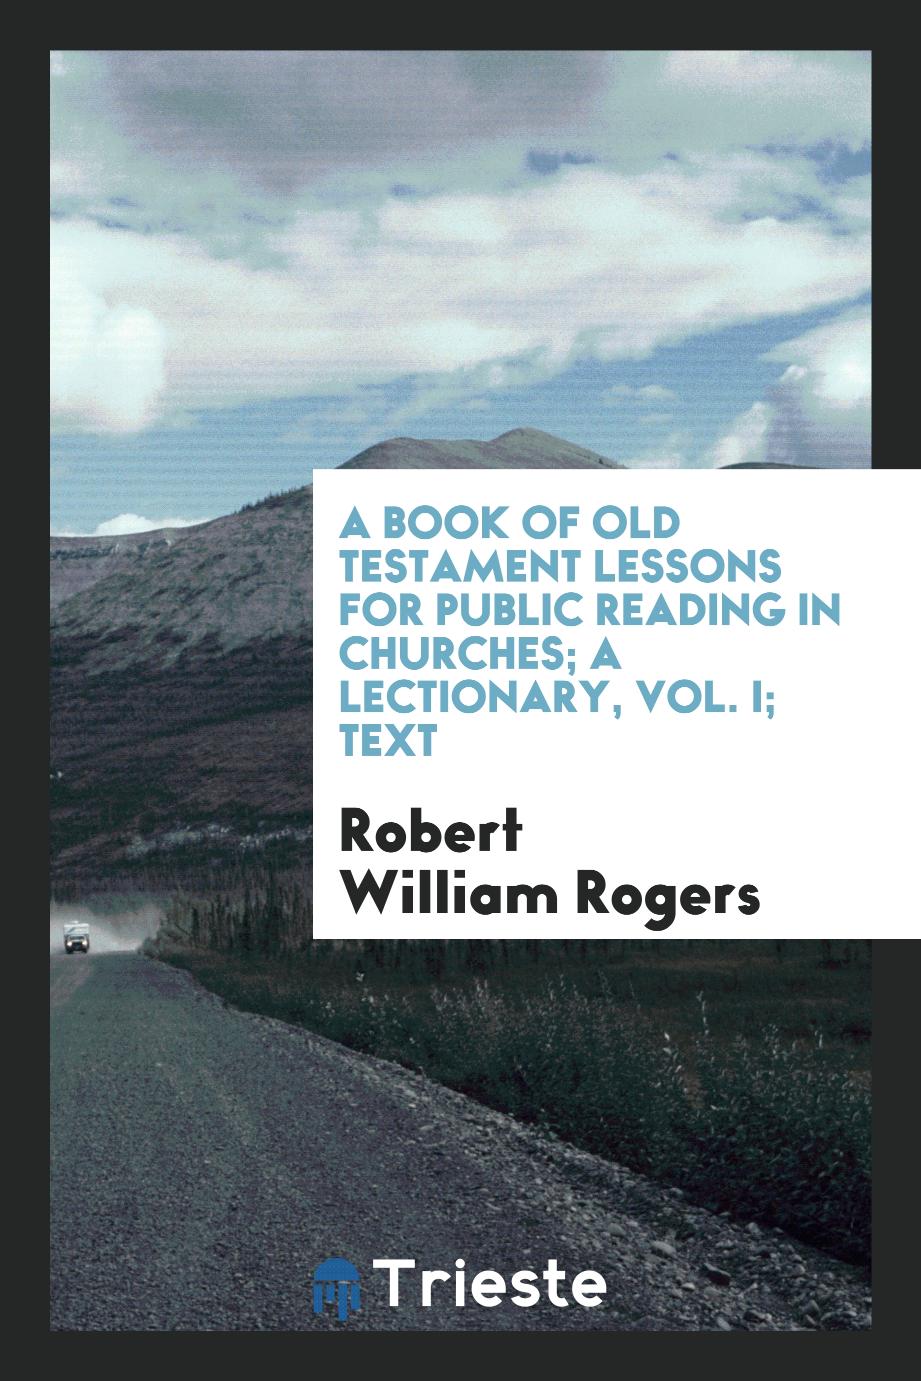 A book of Old Testament lessons for public reading in churches; a lectionary, Vol. I; Text